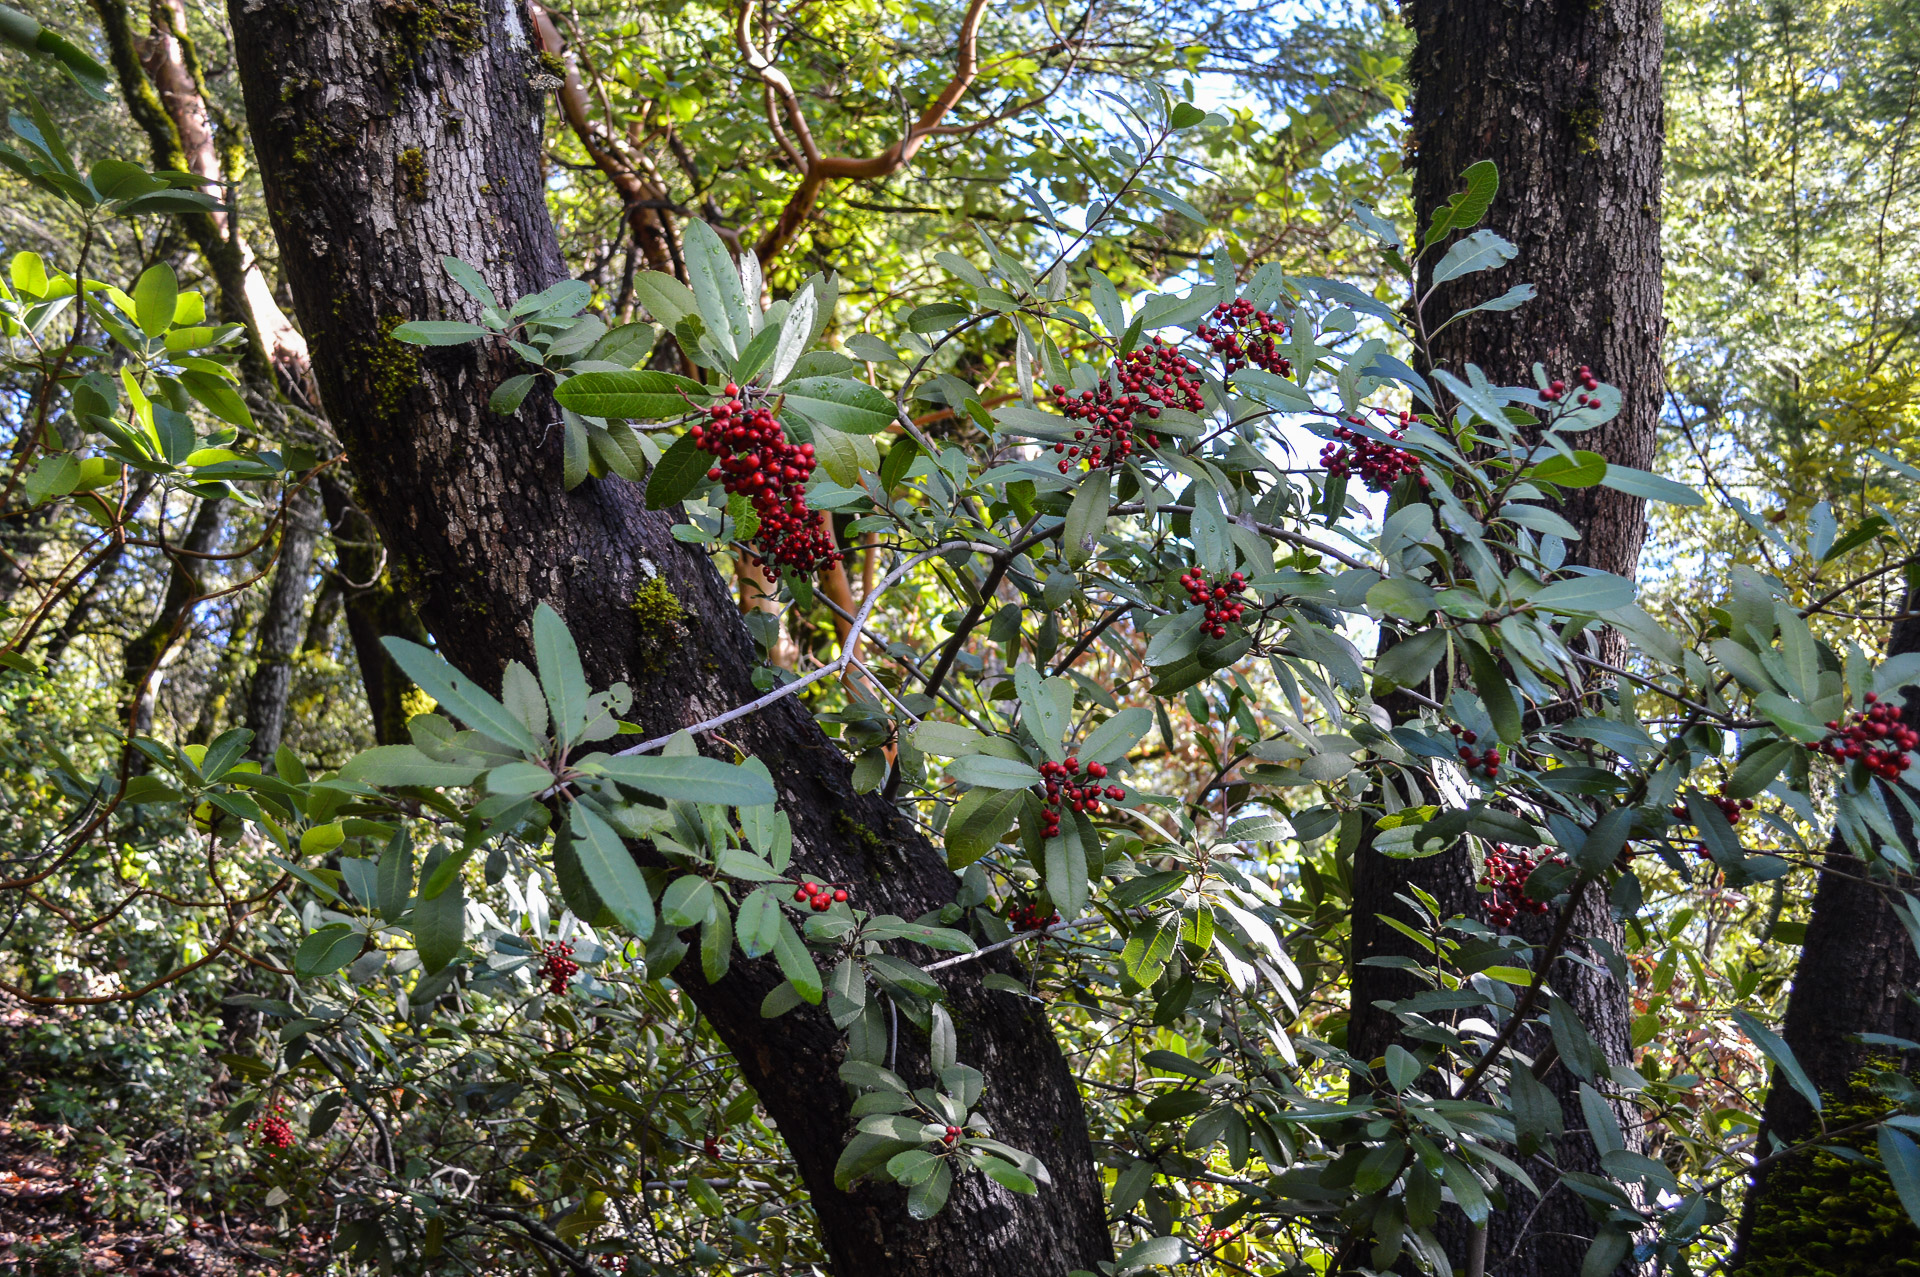 Madrone berries